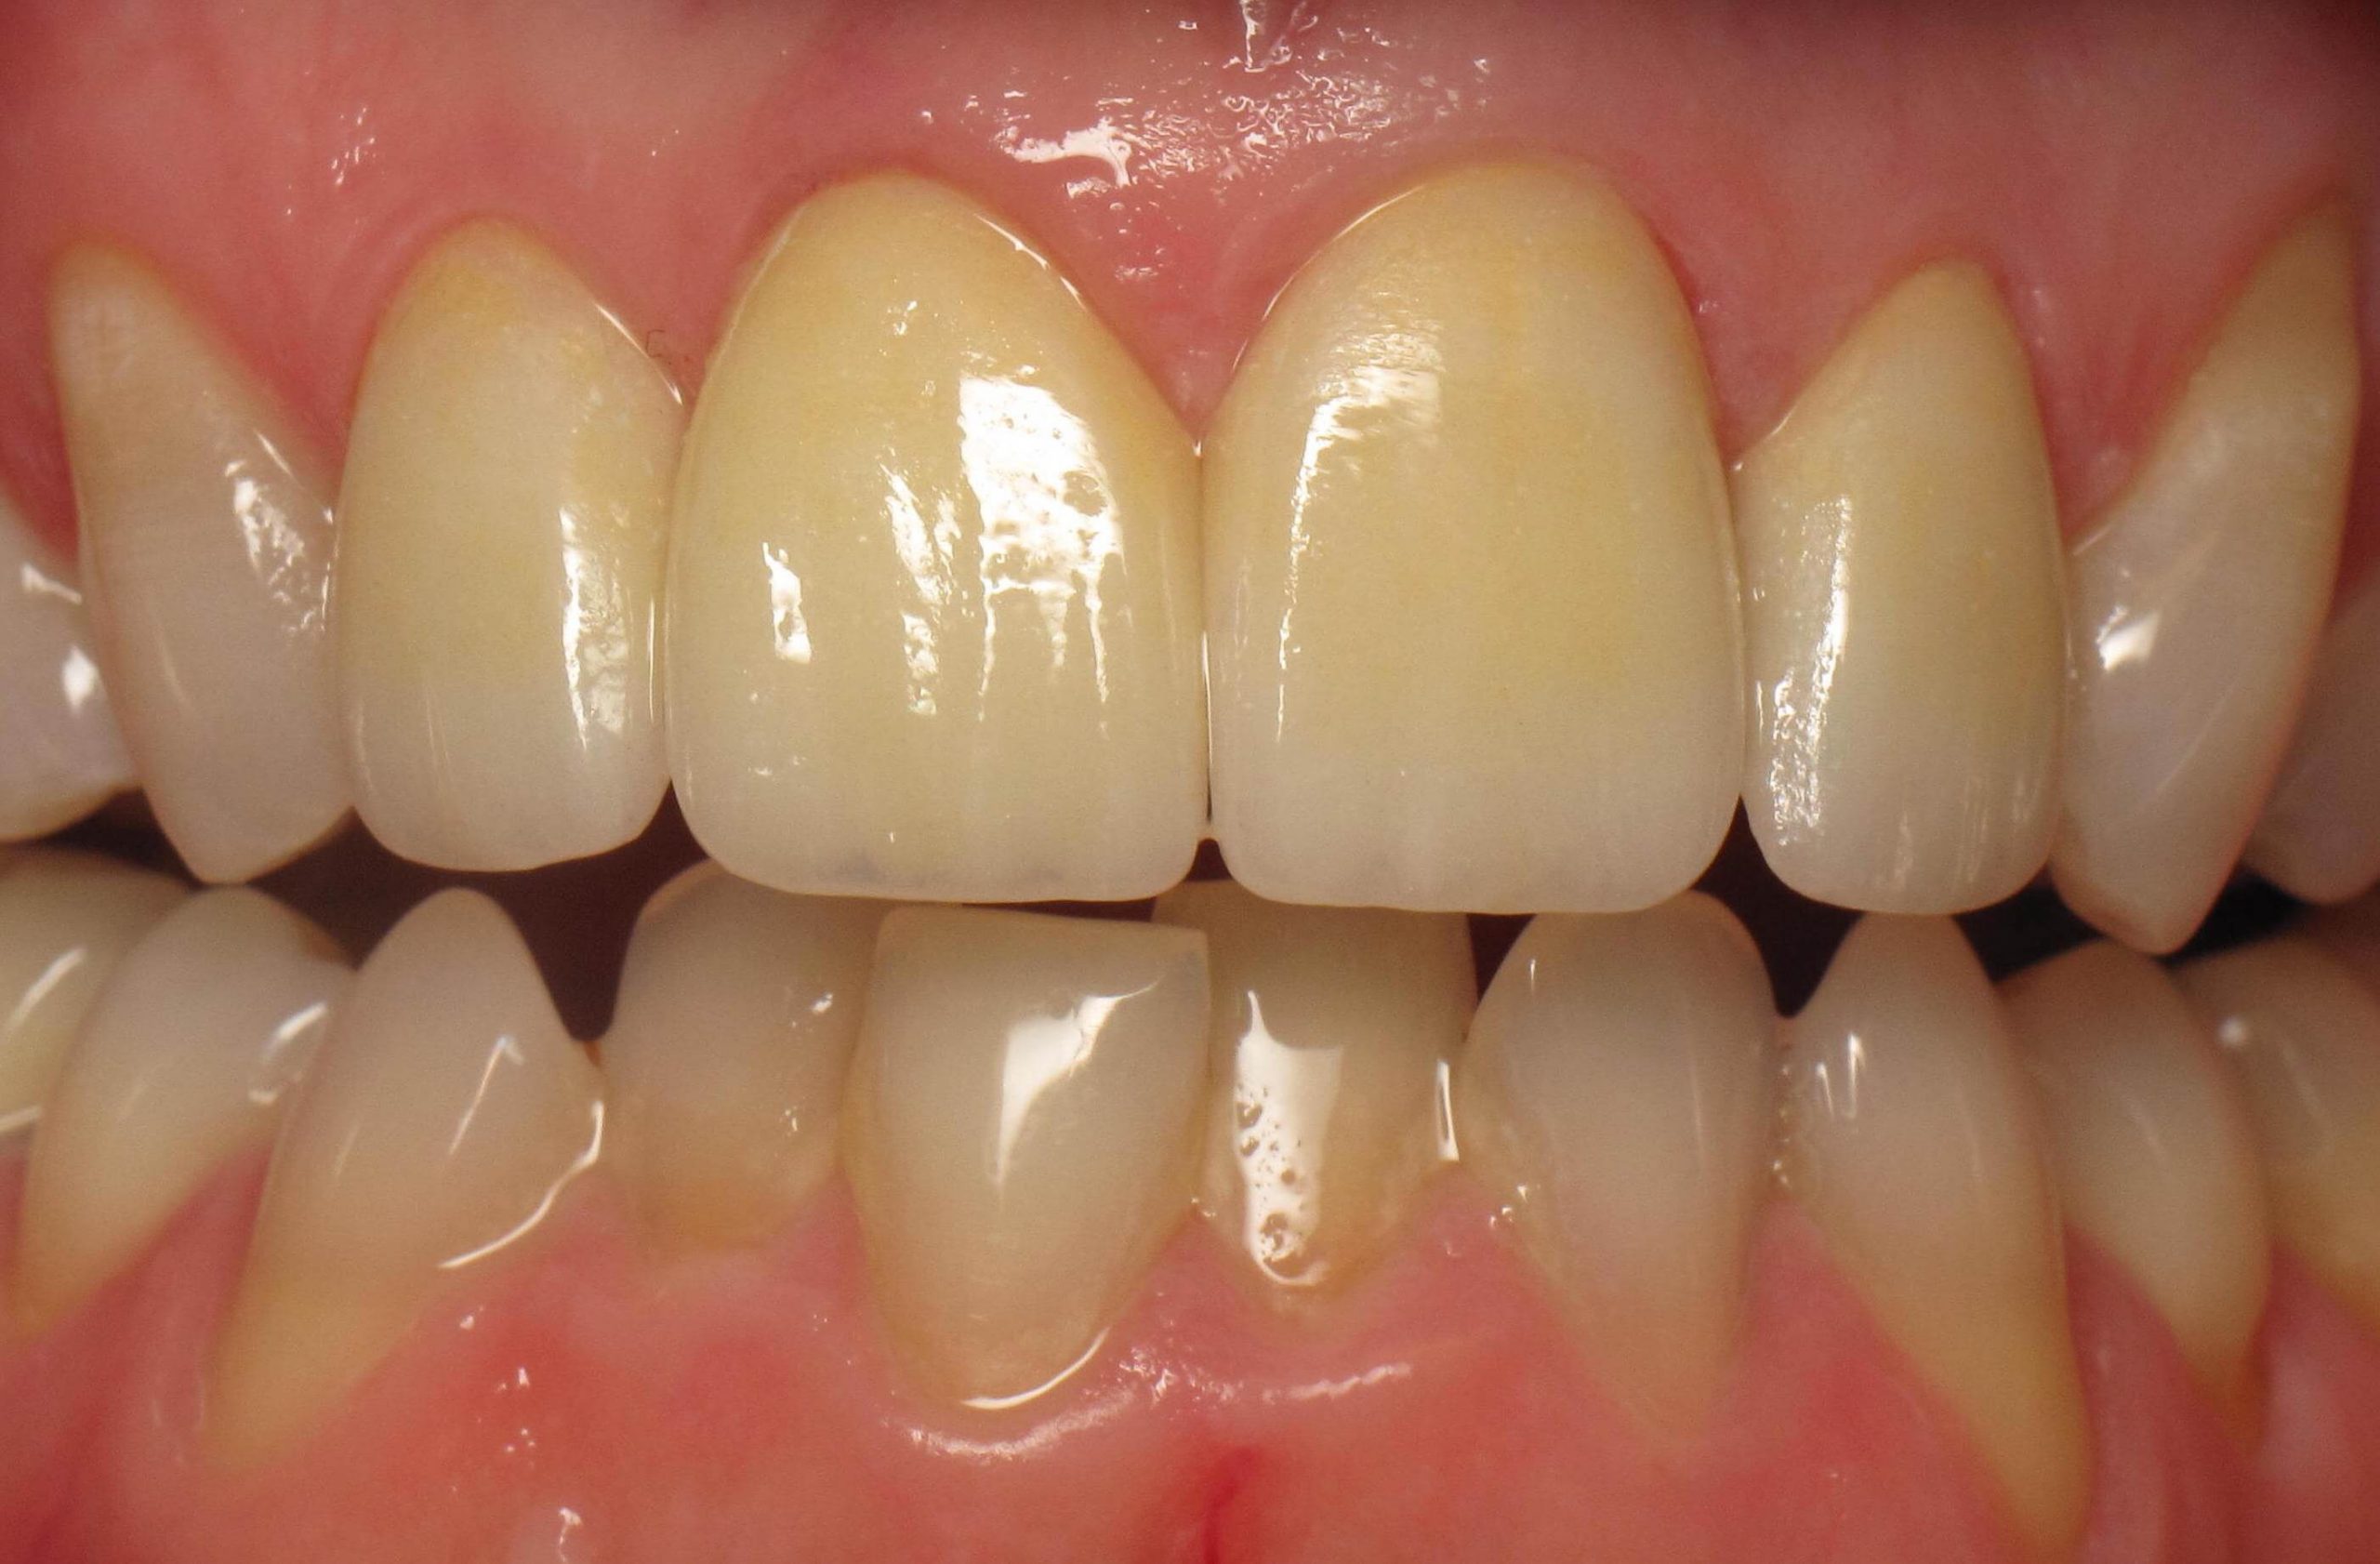 Patient Gallery - Before And After Photos  Weston Spencer Dds pour Same Day Dental Implants Grass Valley, Ca 